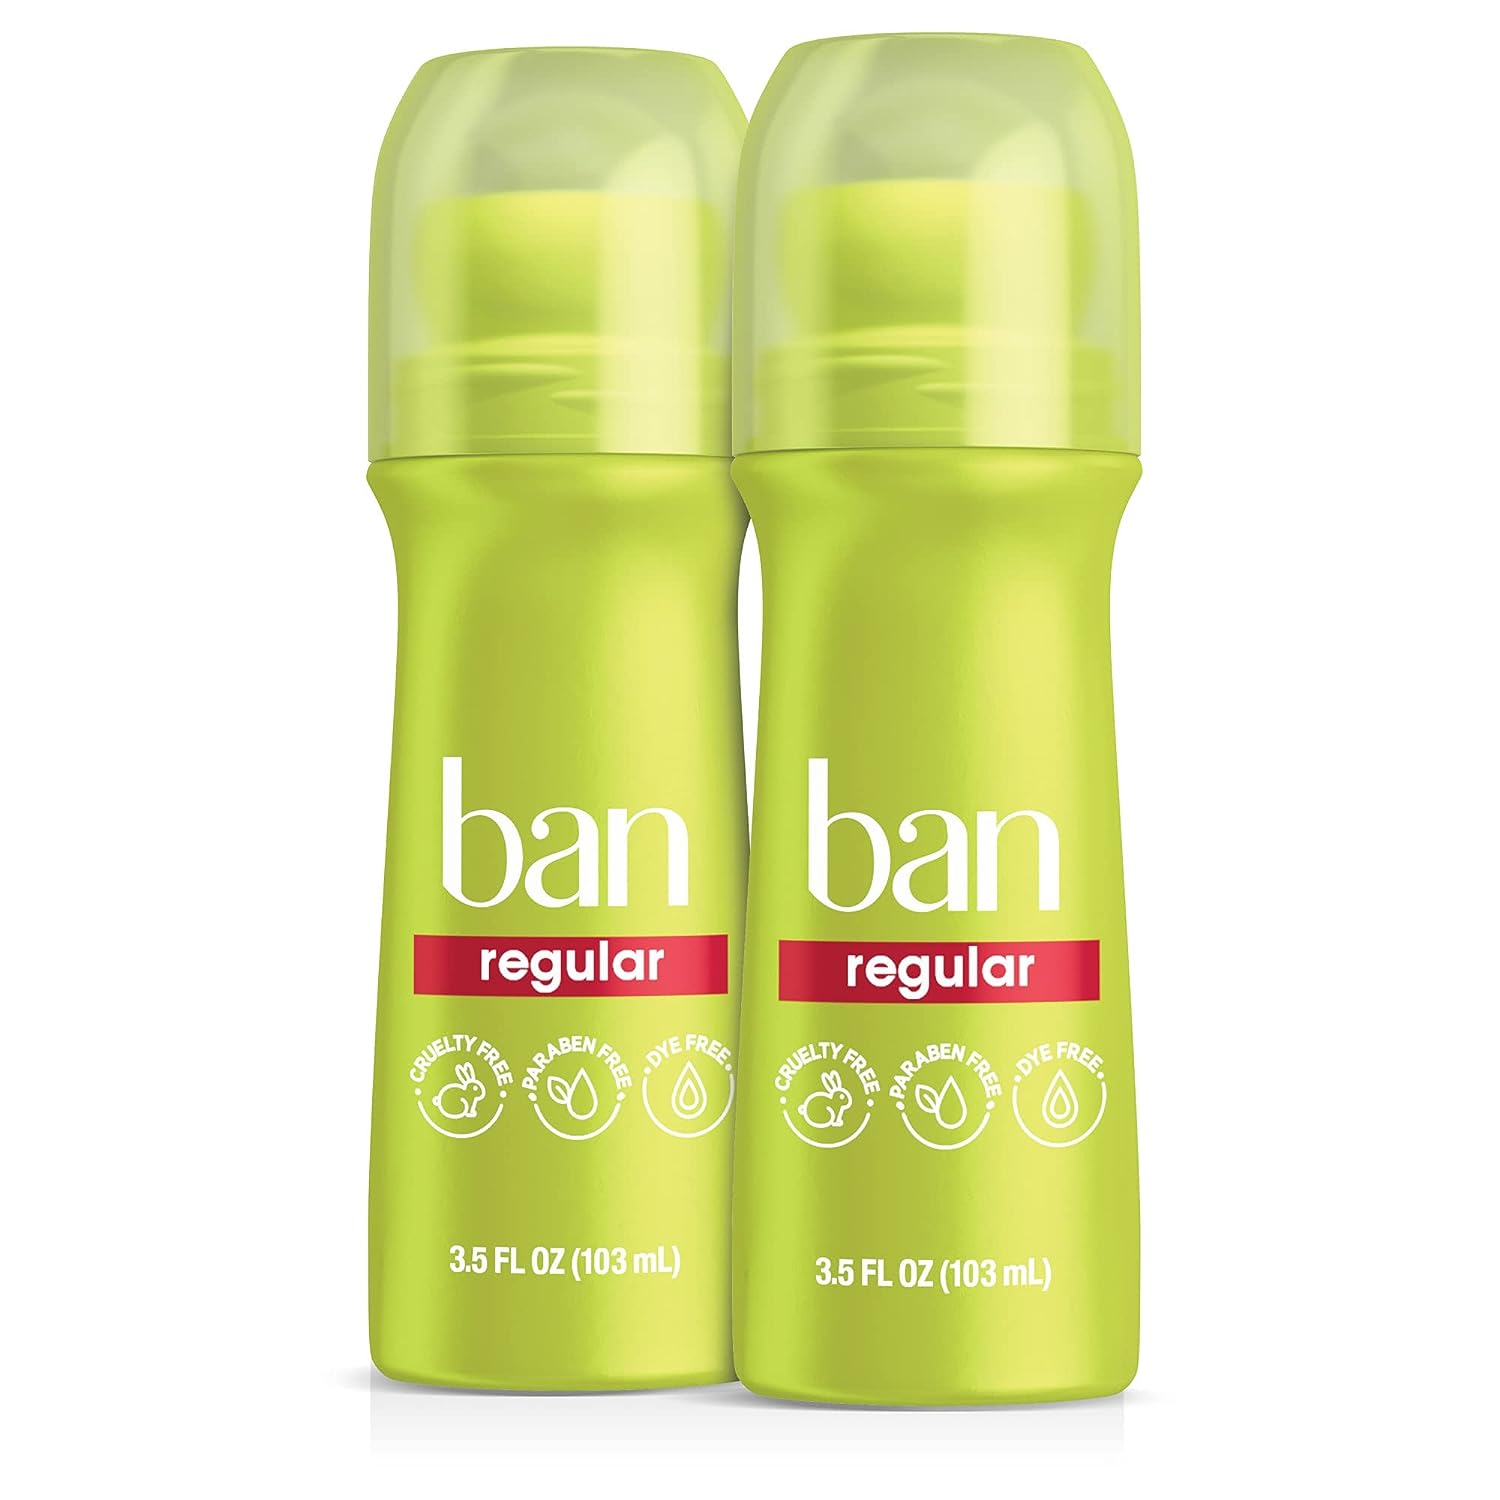 Ban Regular Scent 24-hour Invisible Antiperspirant, Roll-on Deodorant for Women and Men, Underarm Wetness Protection, with Odor-fighting Ingredients, 3.5 oz, 2-pack